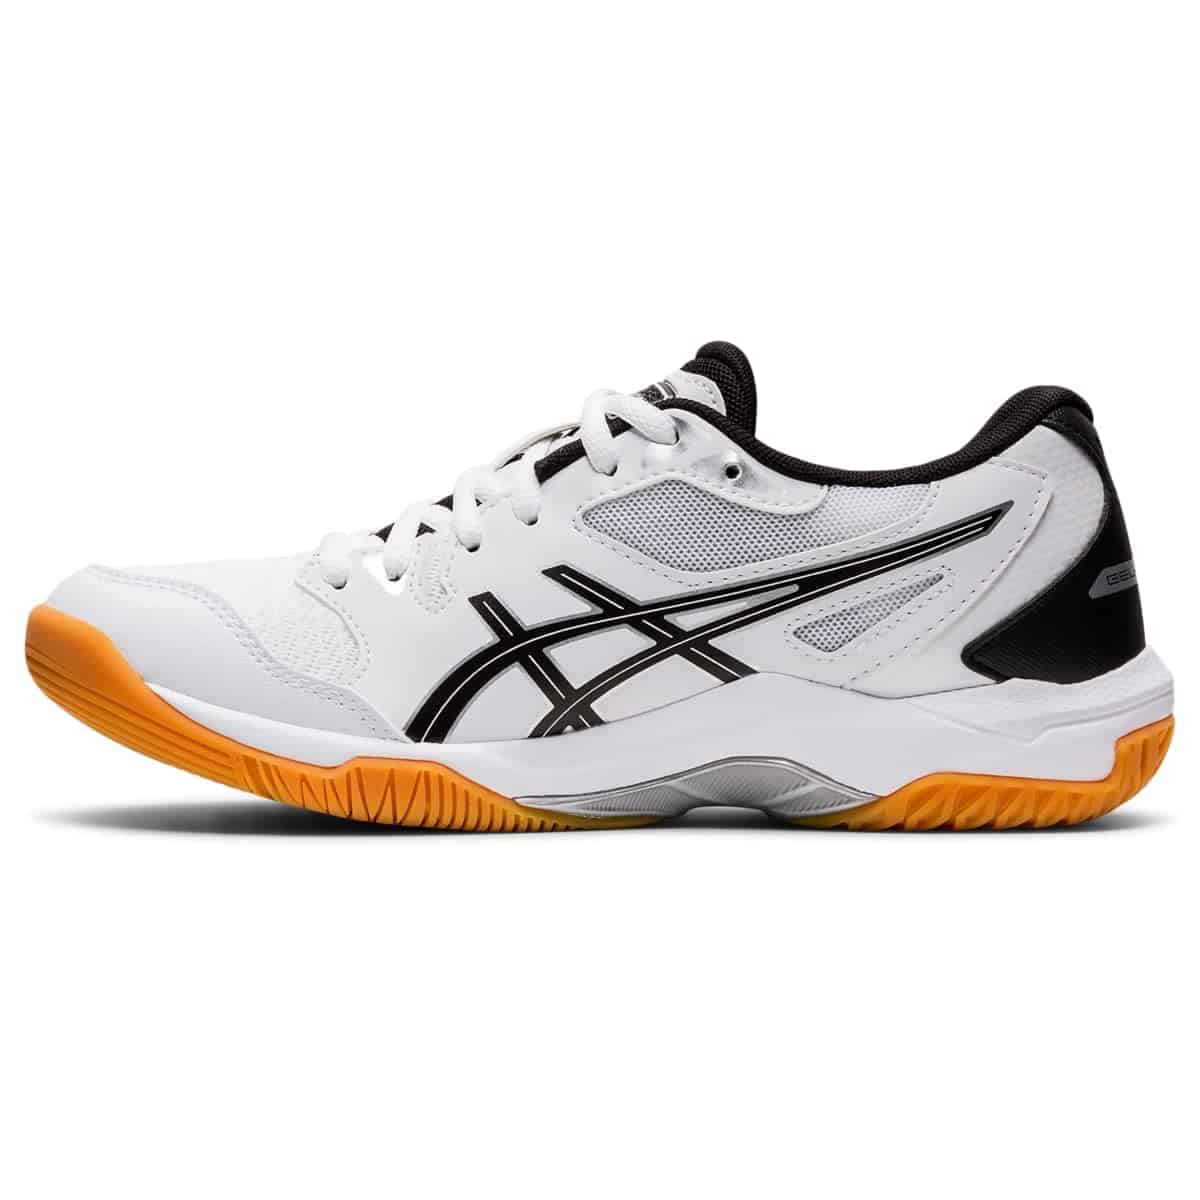 ASICS Gel-Rocket 10: Volleyball Shoes Review